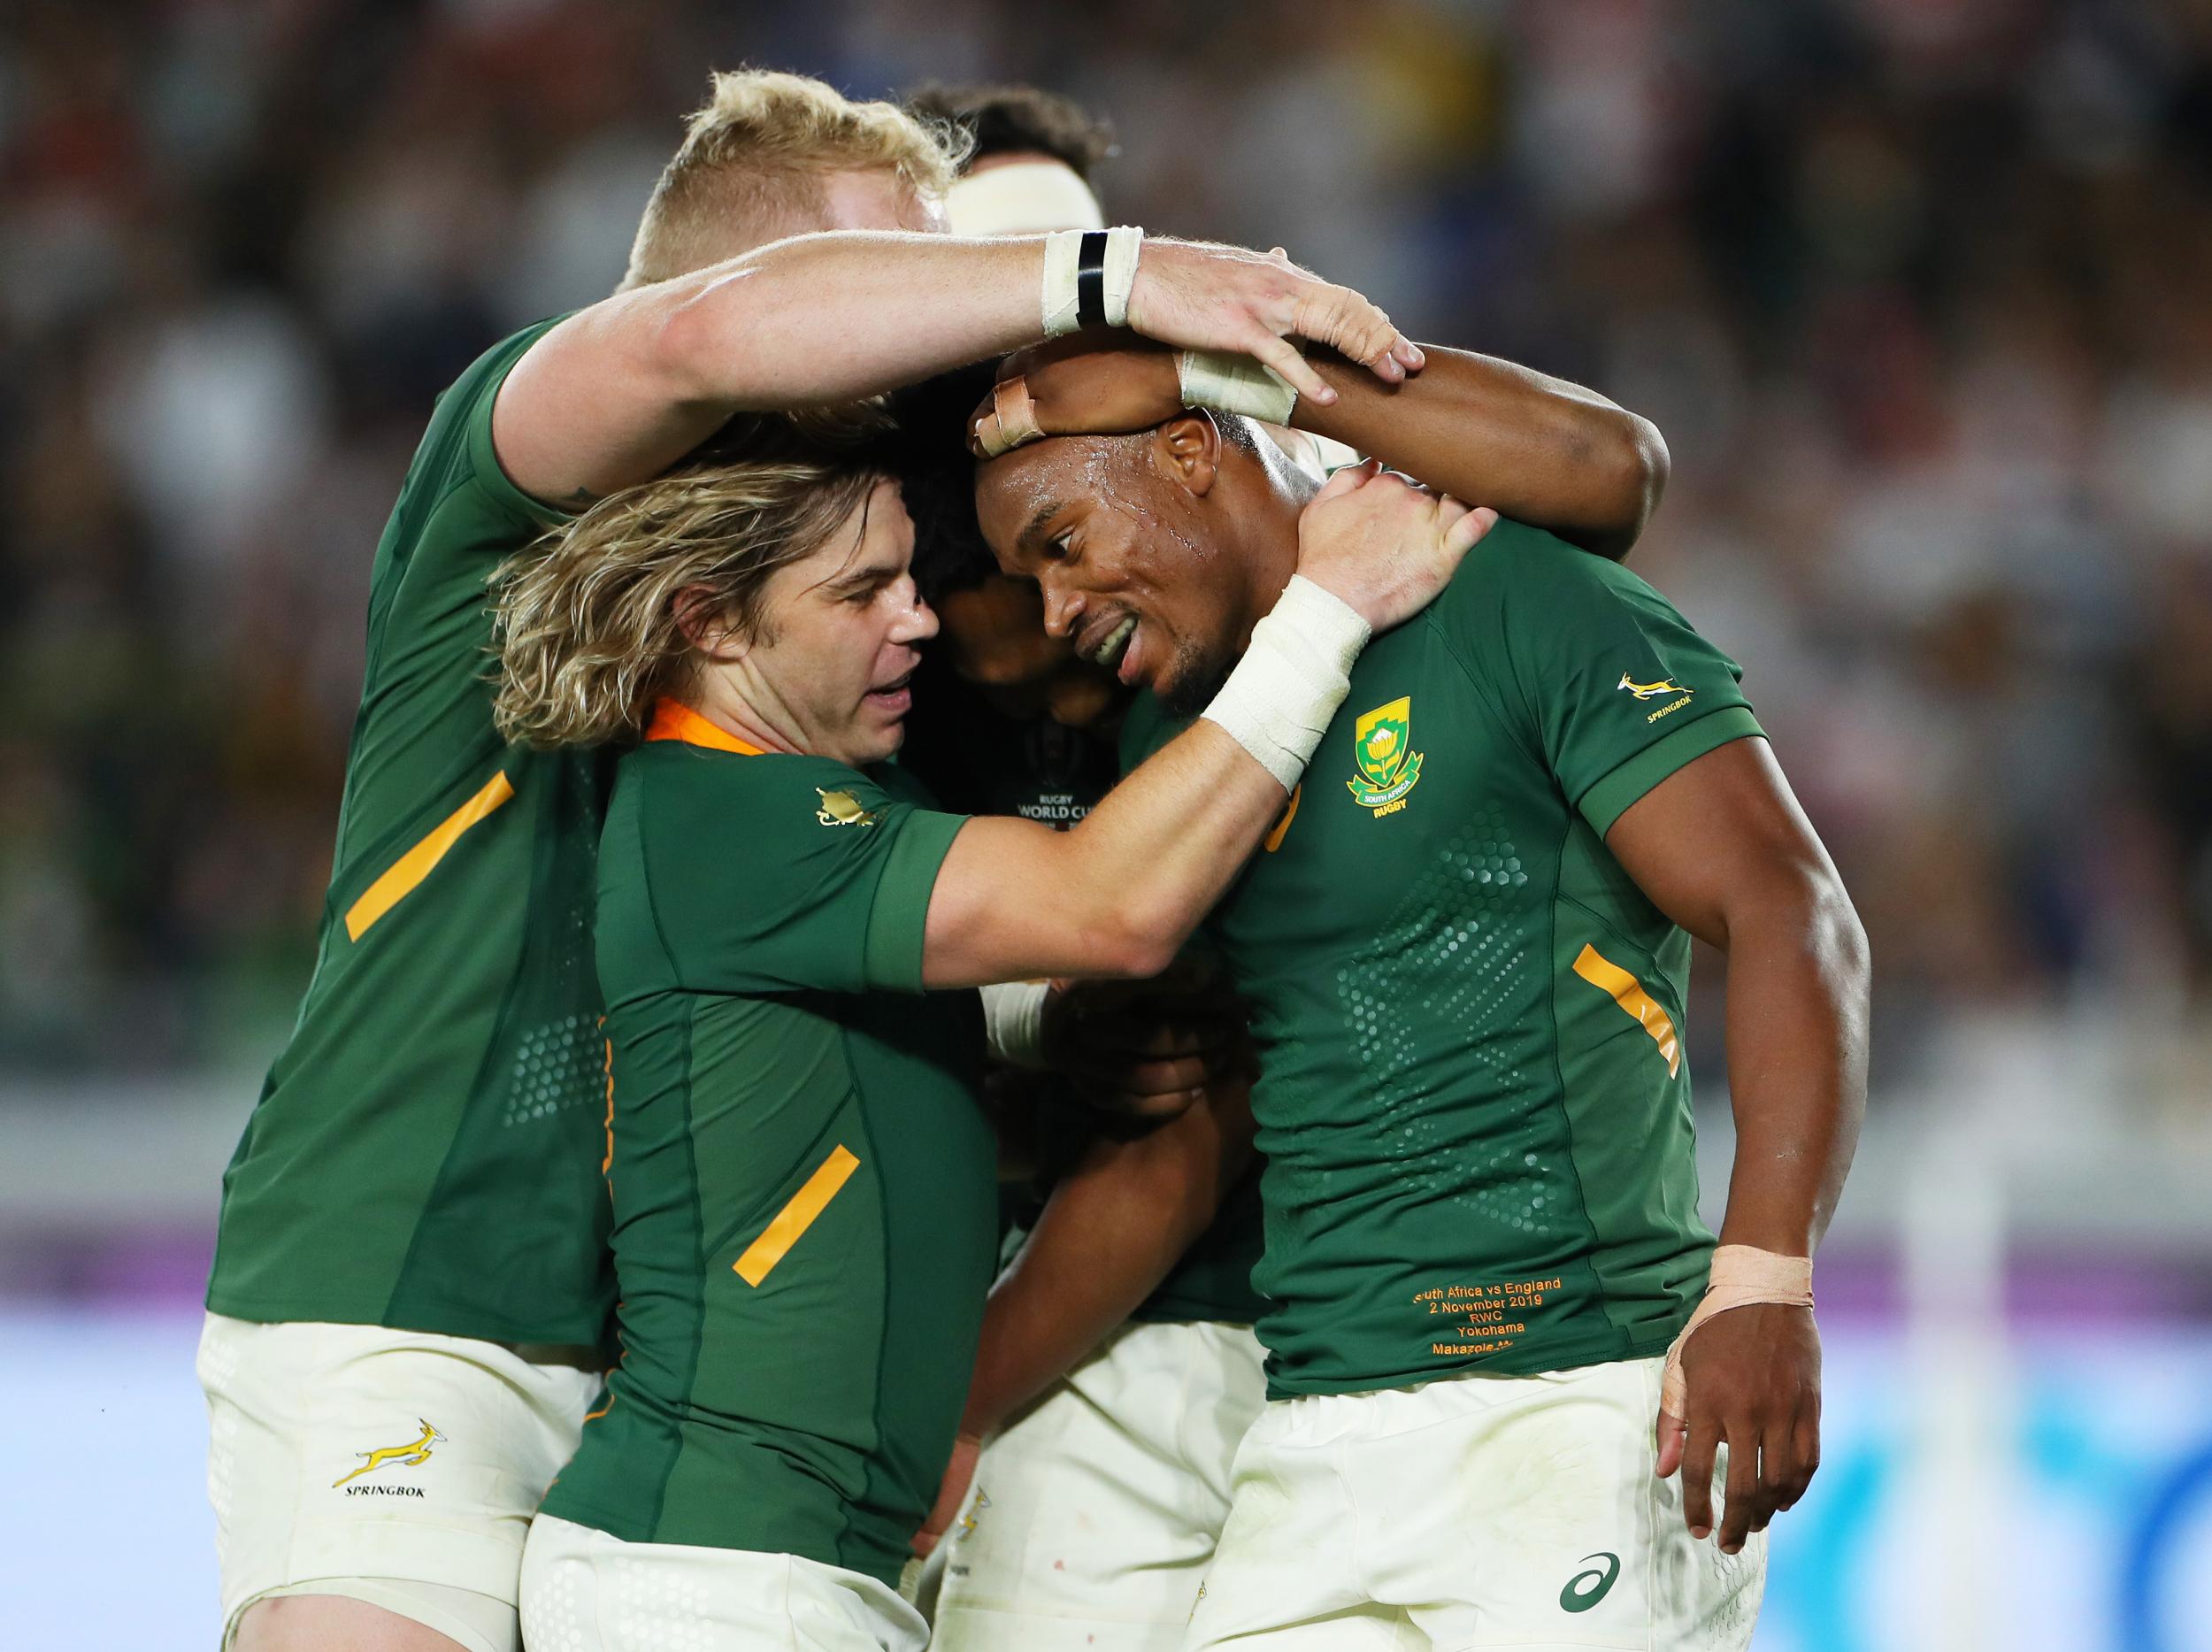 England vs South Africa player ratings: Rugby World Cup 2019 final, every player ranked and rated